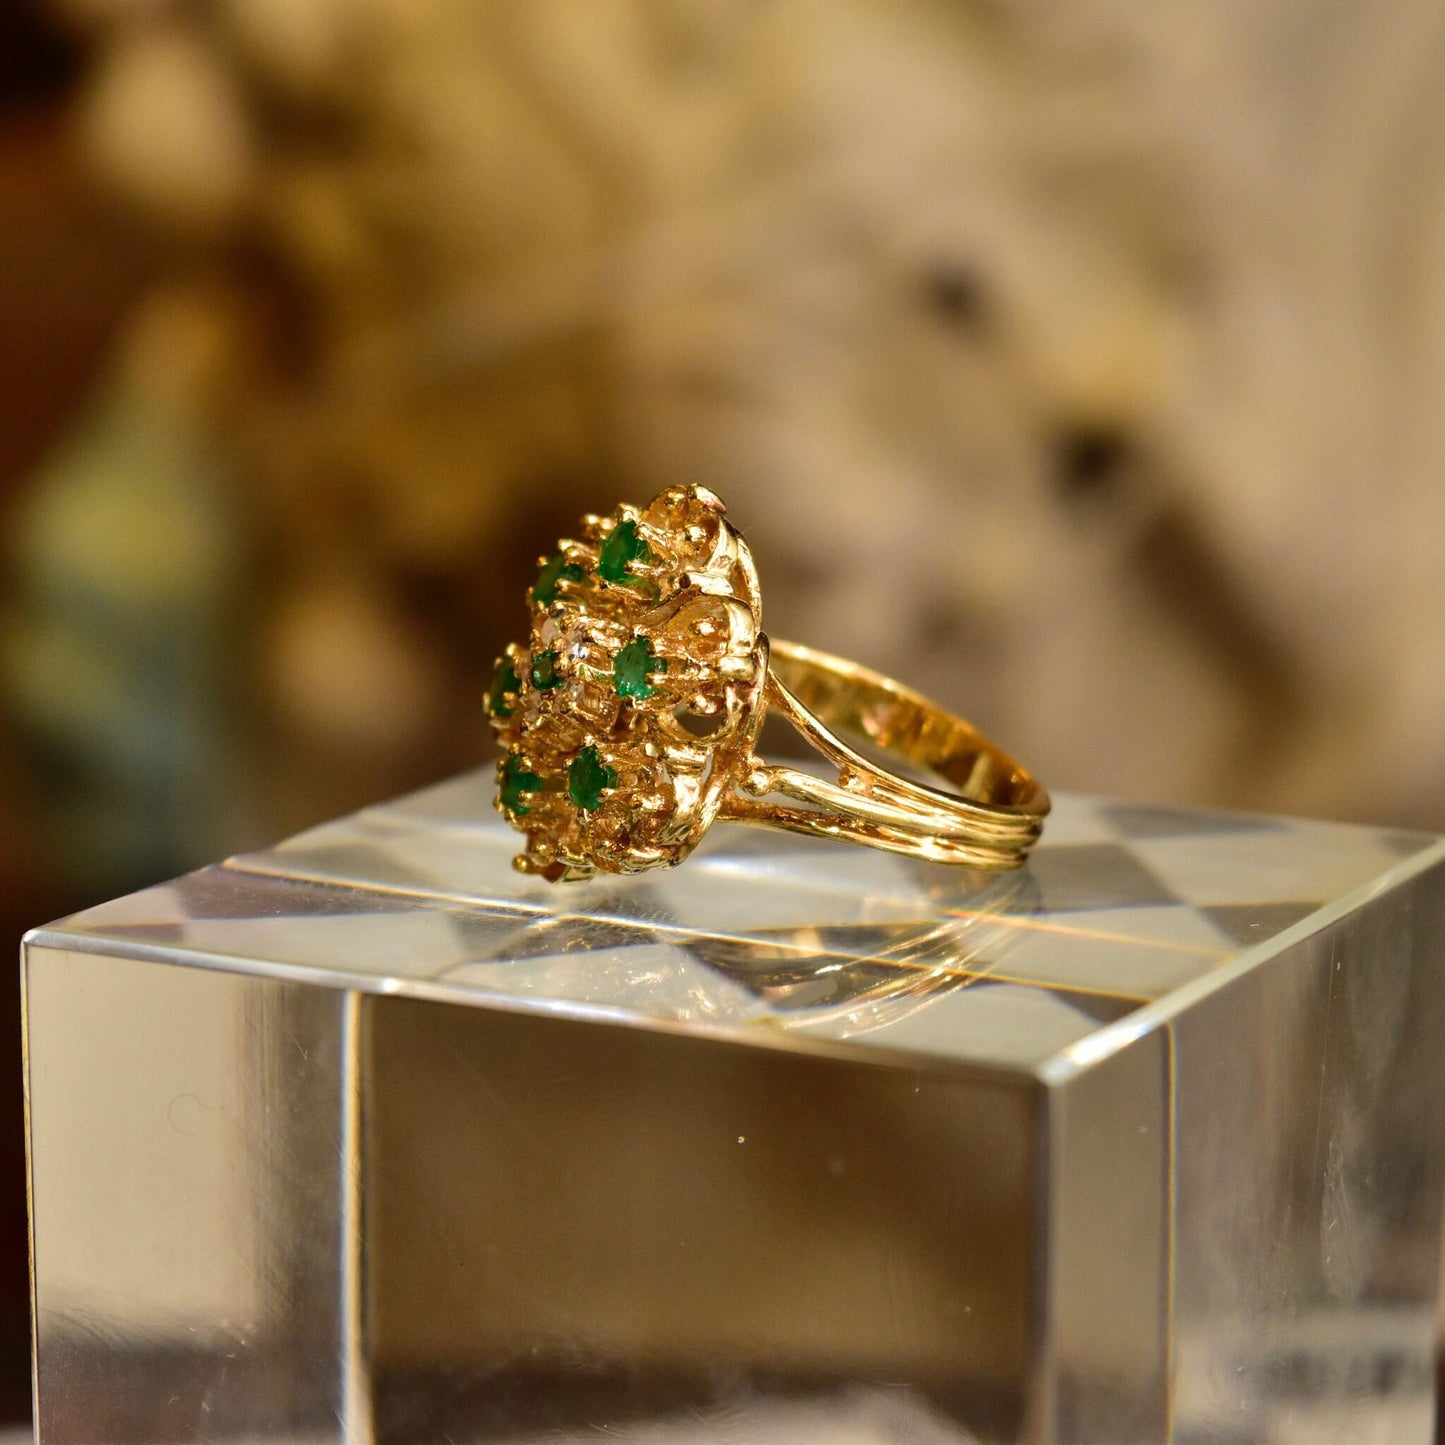 14K yellow gold emerald and diamond cluster cocktail ring featuring a dome-shaped floral design set with round emeralds surrounded by small diamonds, displayed on a reflective surface, size 7 1/2 US.